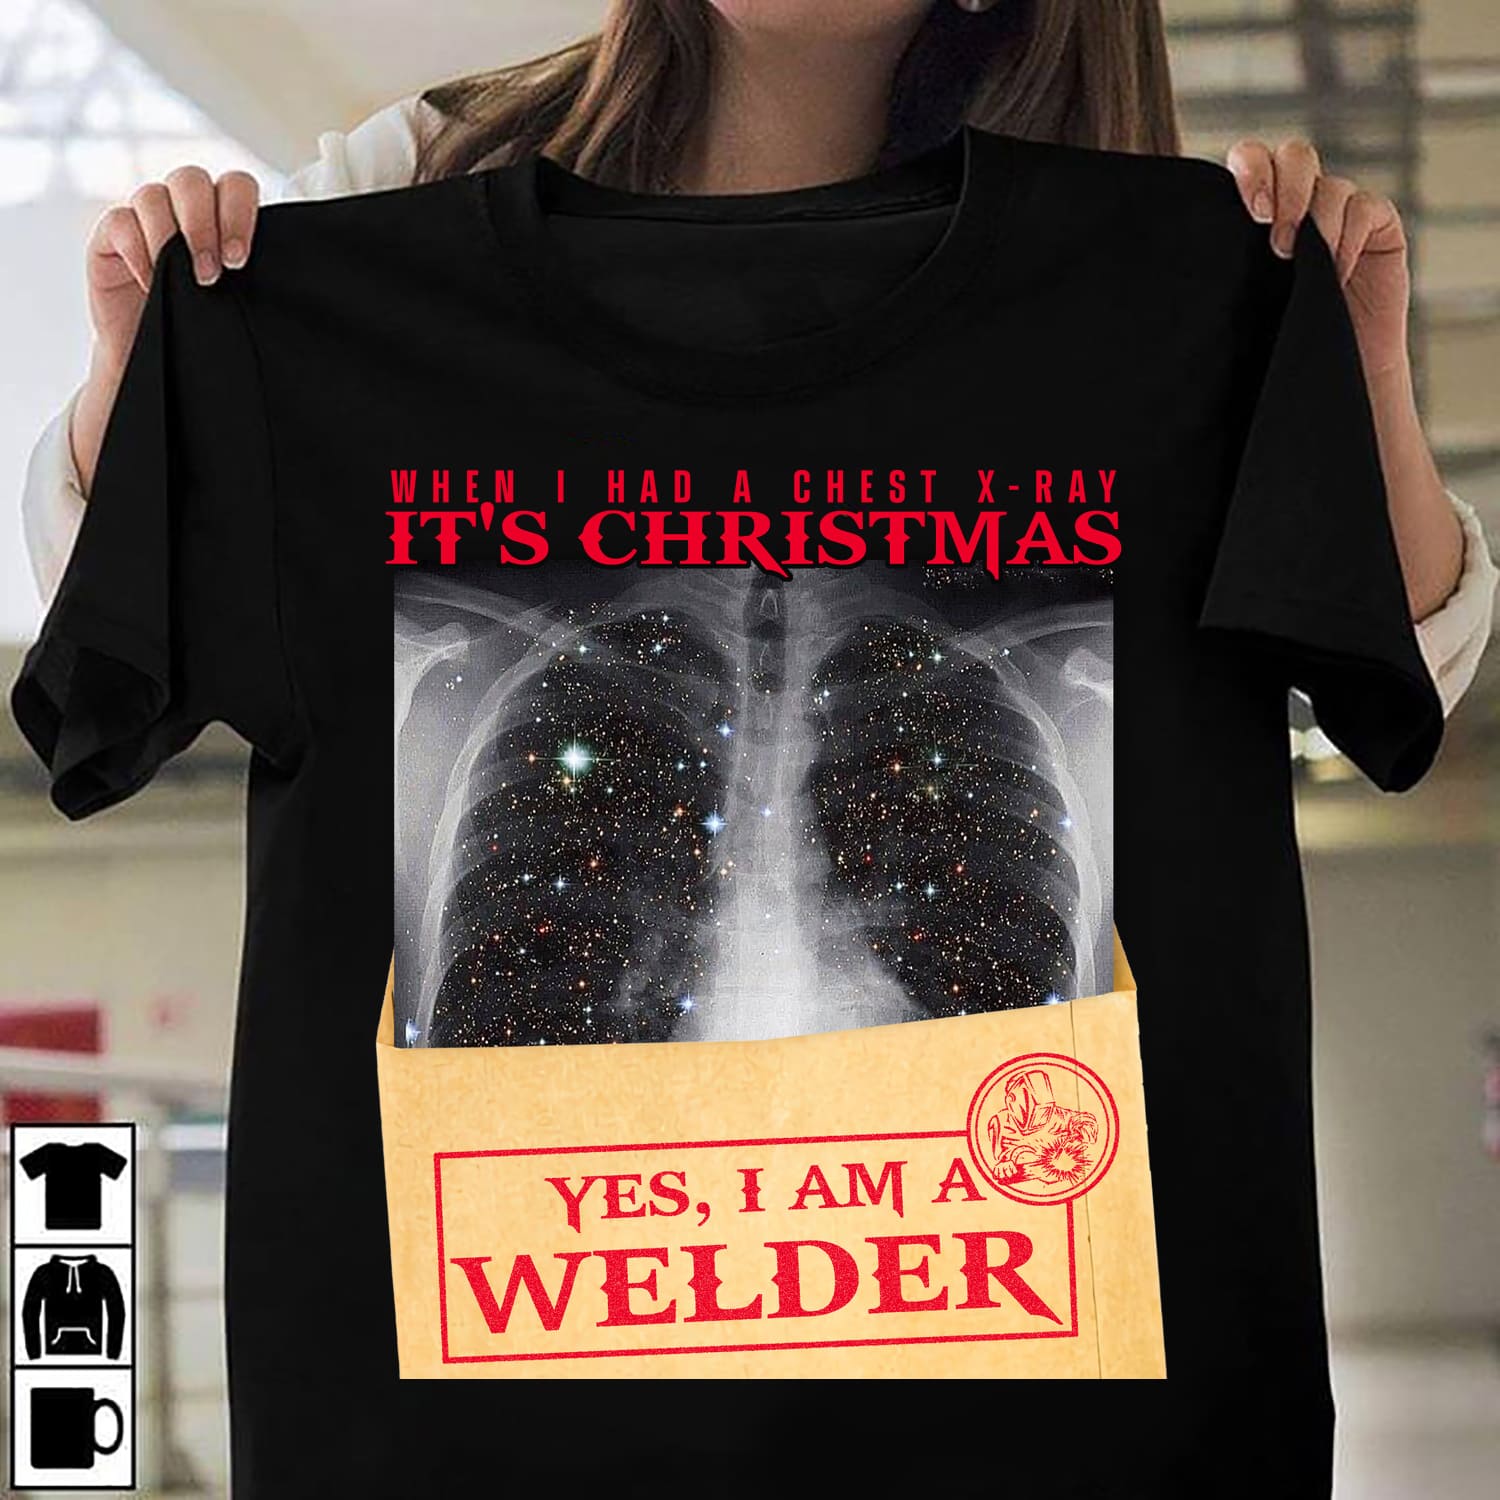 When I had a chest x-ray It's christmas yes I am a welder - Christmas gift for welder